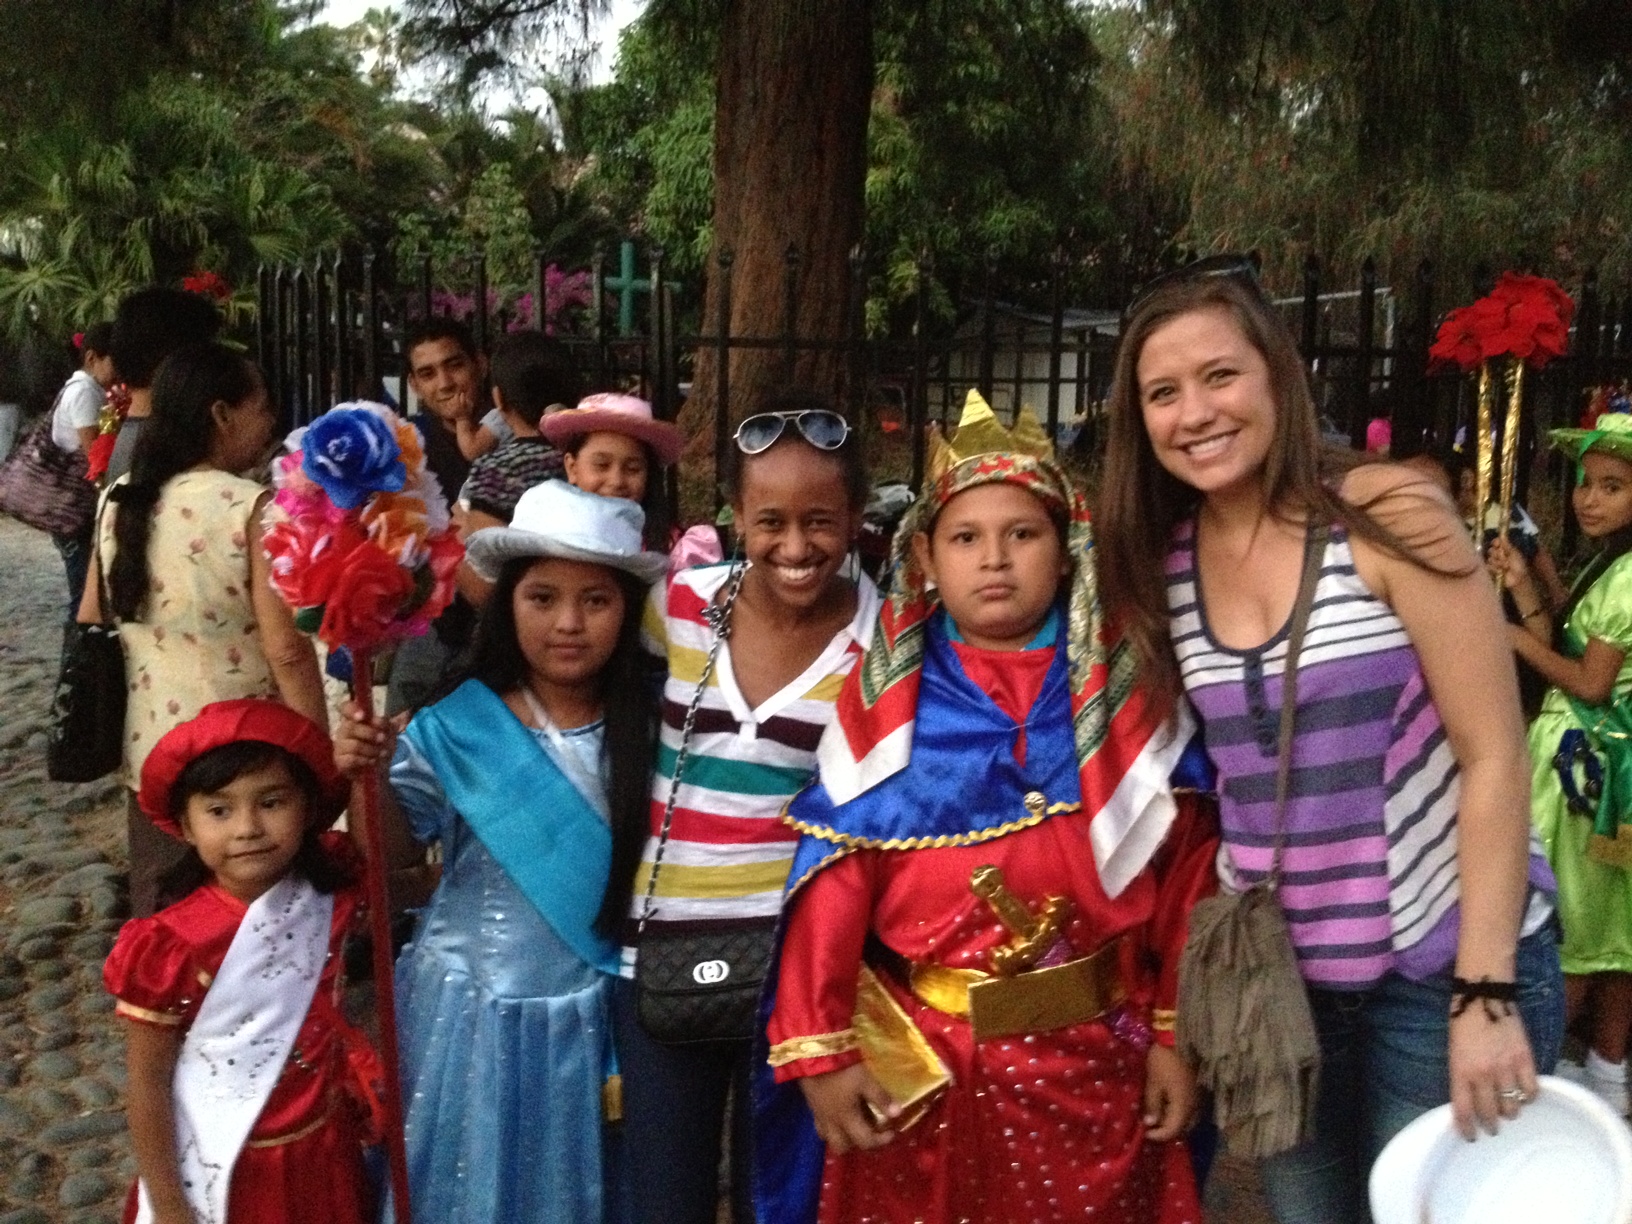 SMU students with children in indigenous costumes